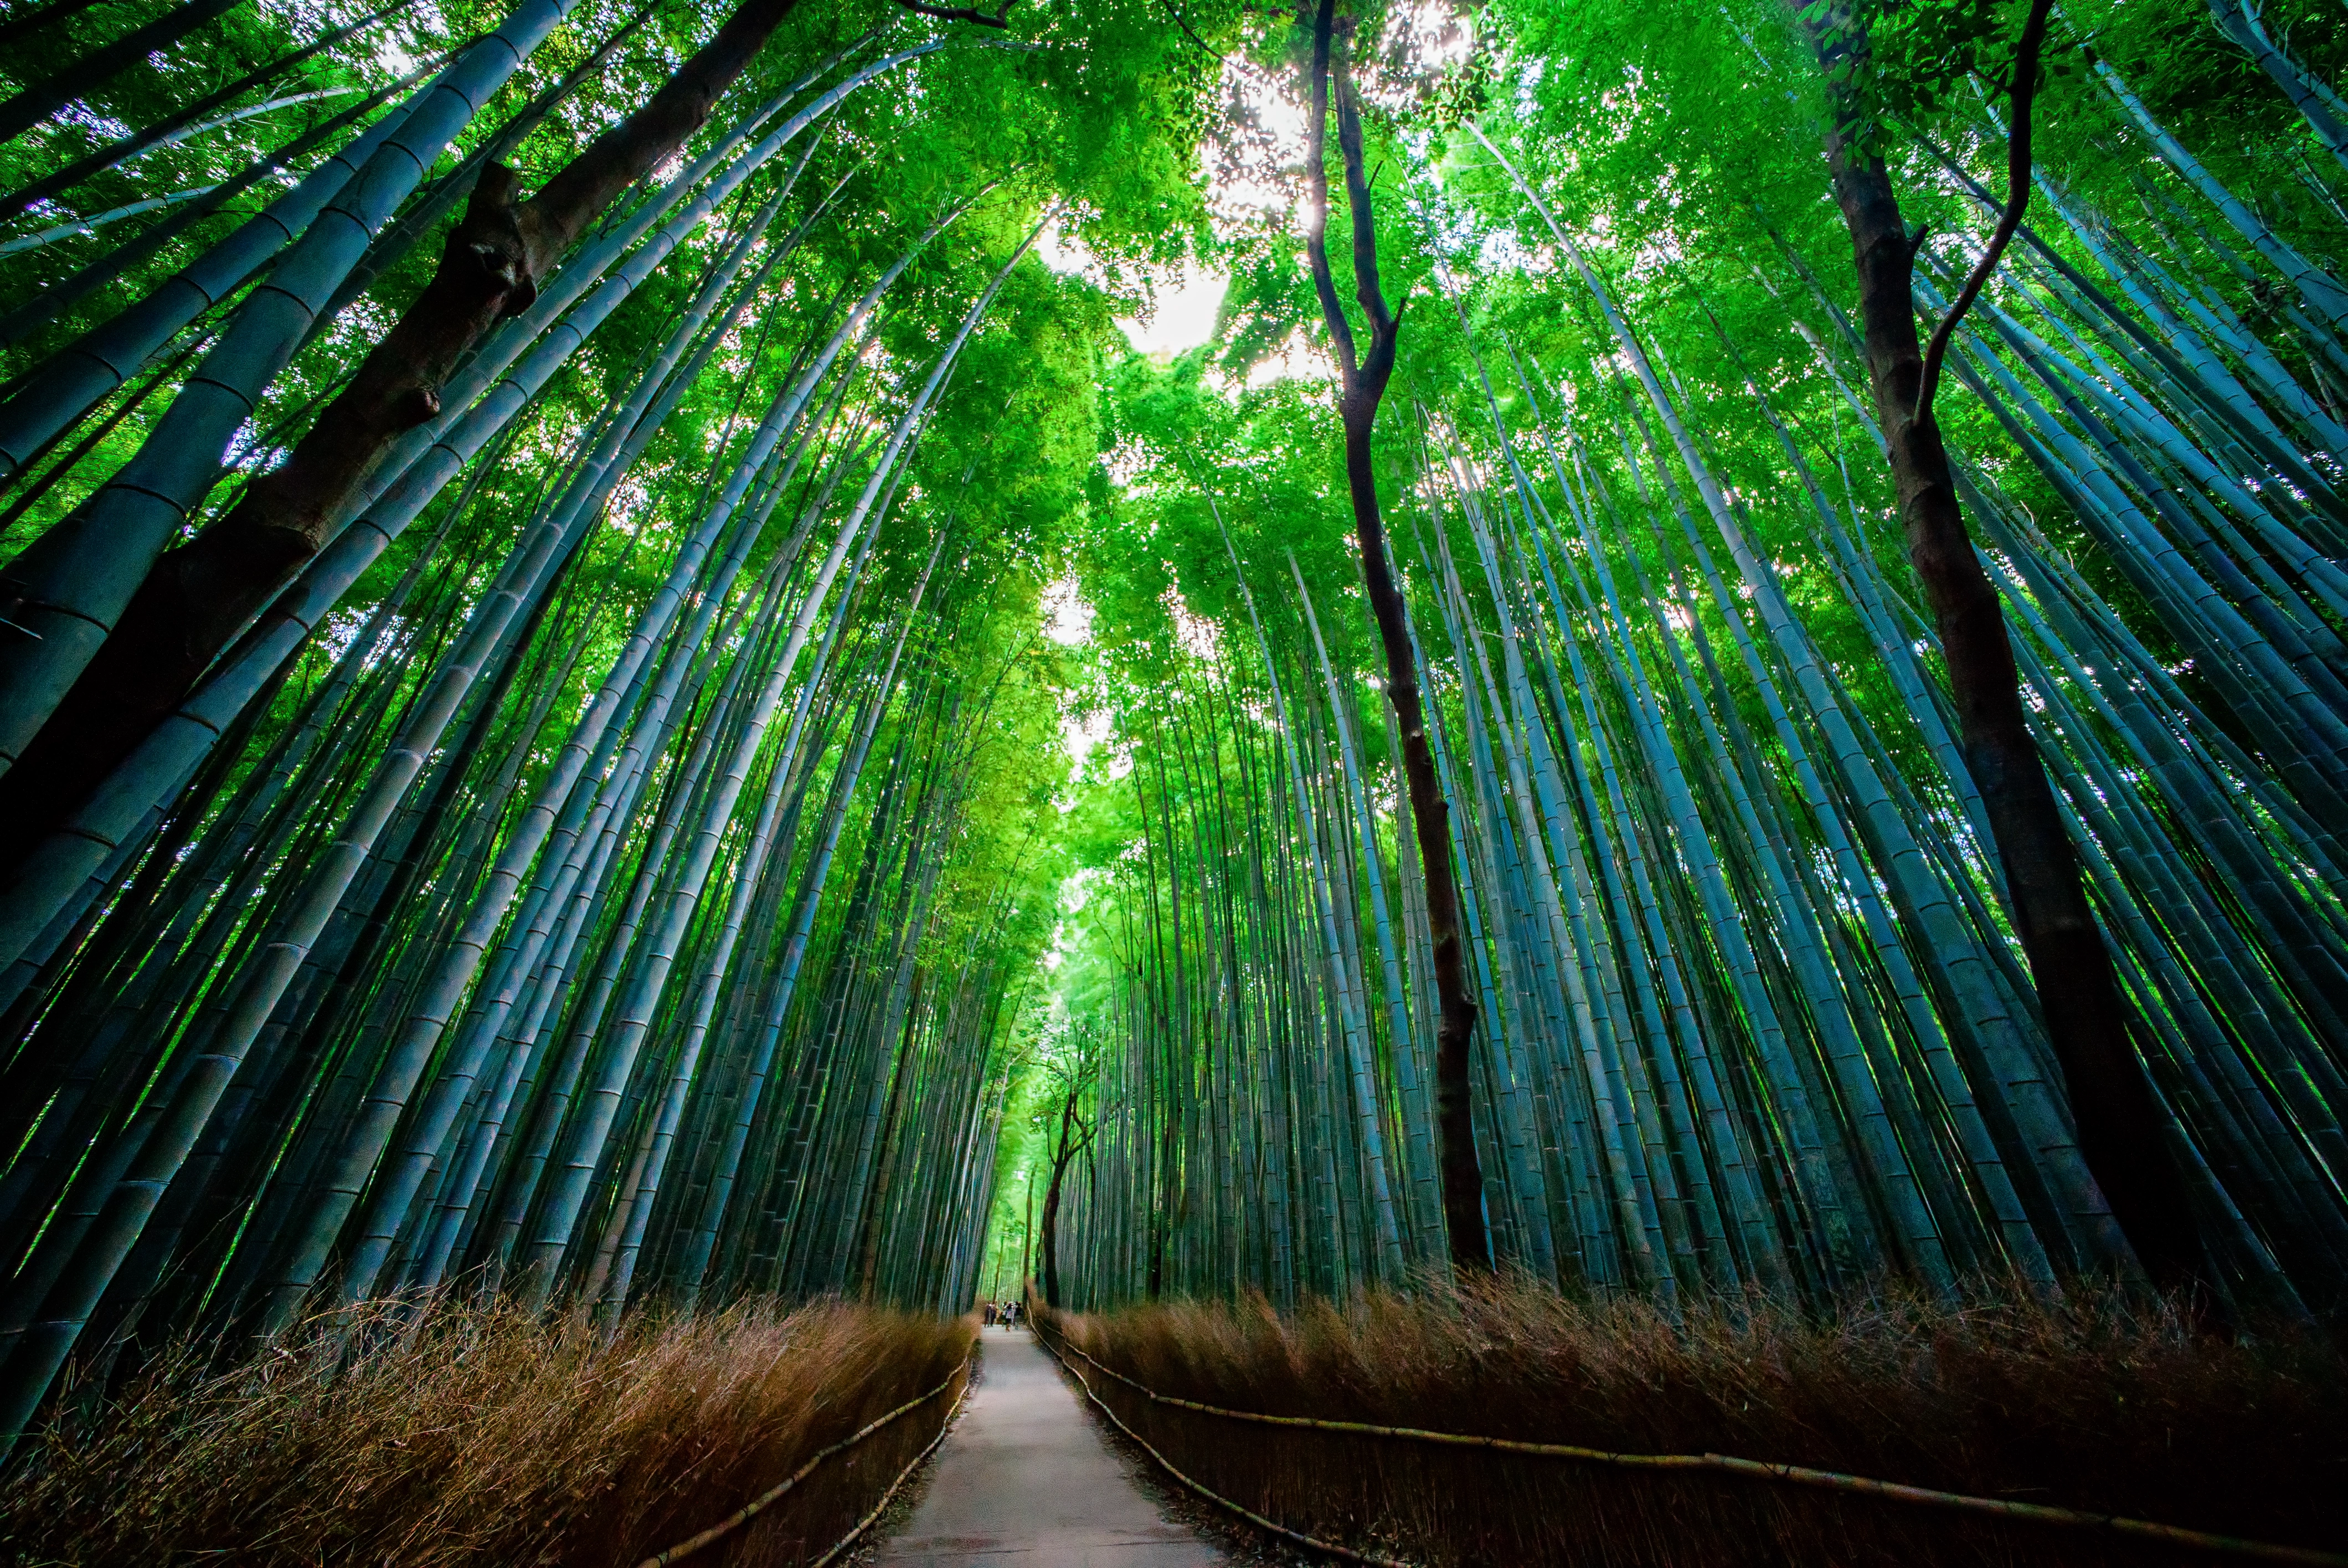 Sagano Bamboo Forest in Japan